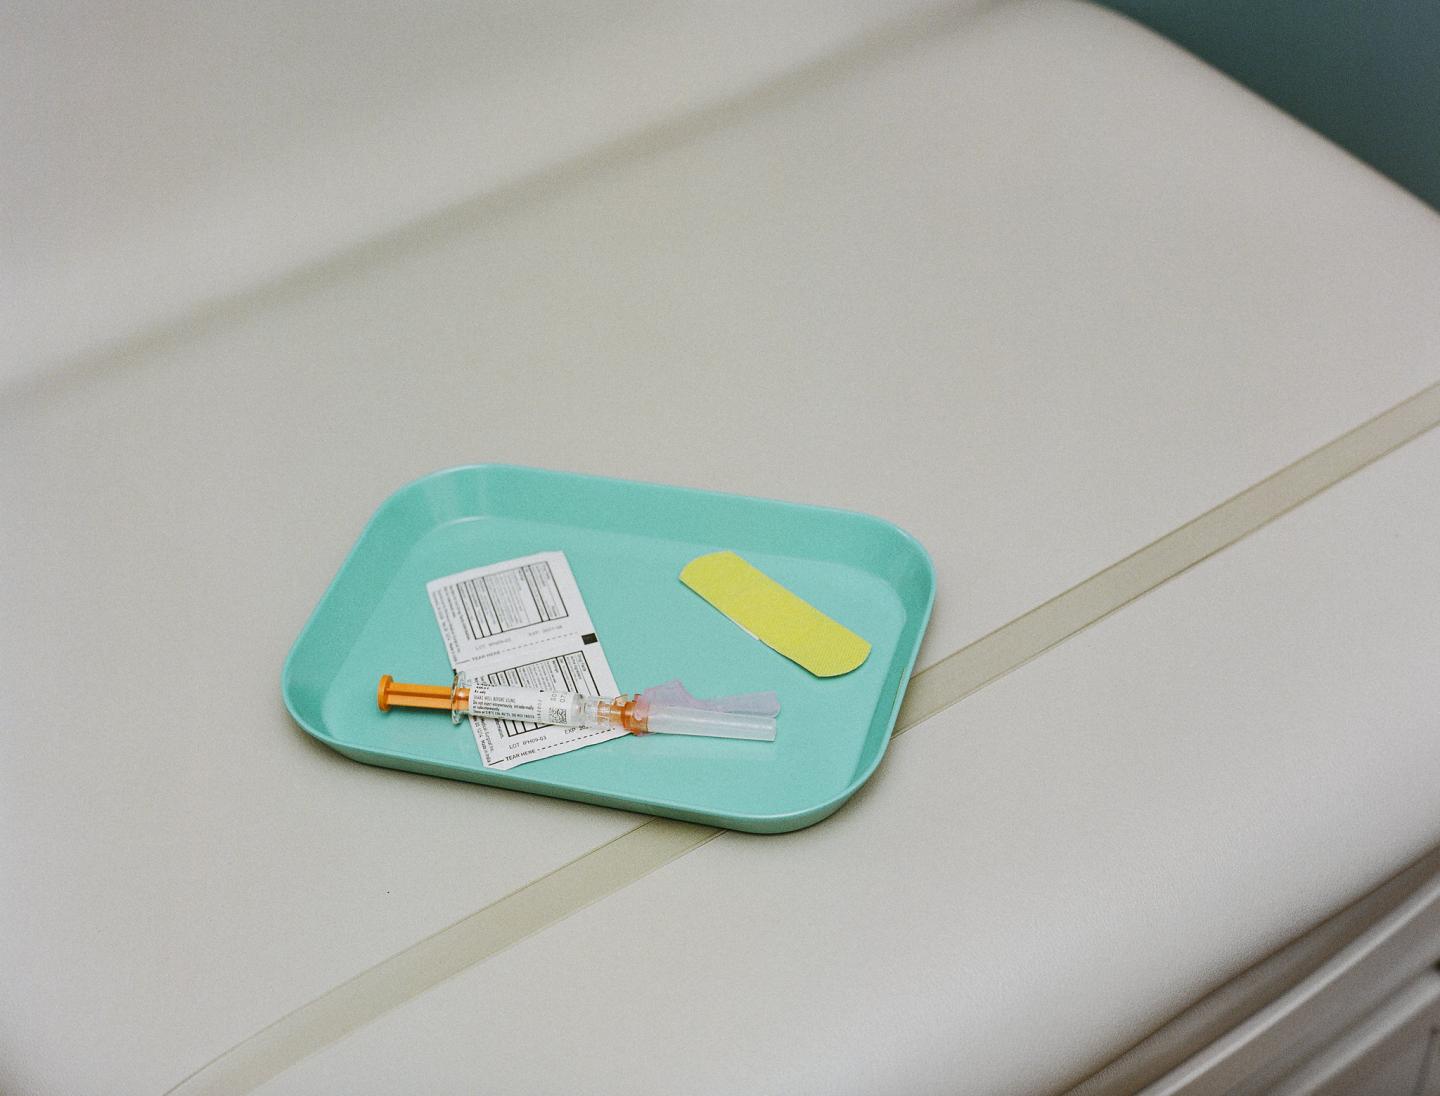 Vaccine on a Tray with Swabs and a Band-Aid